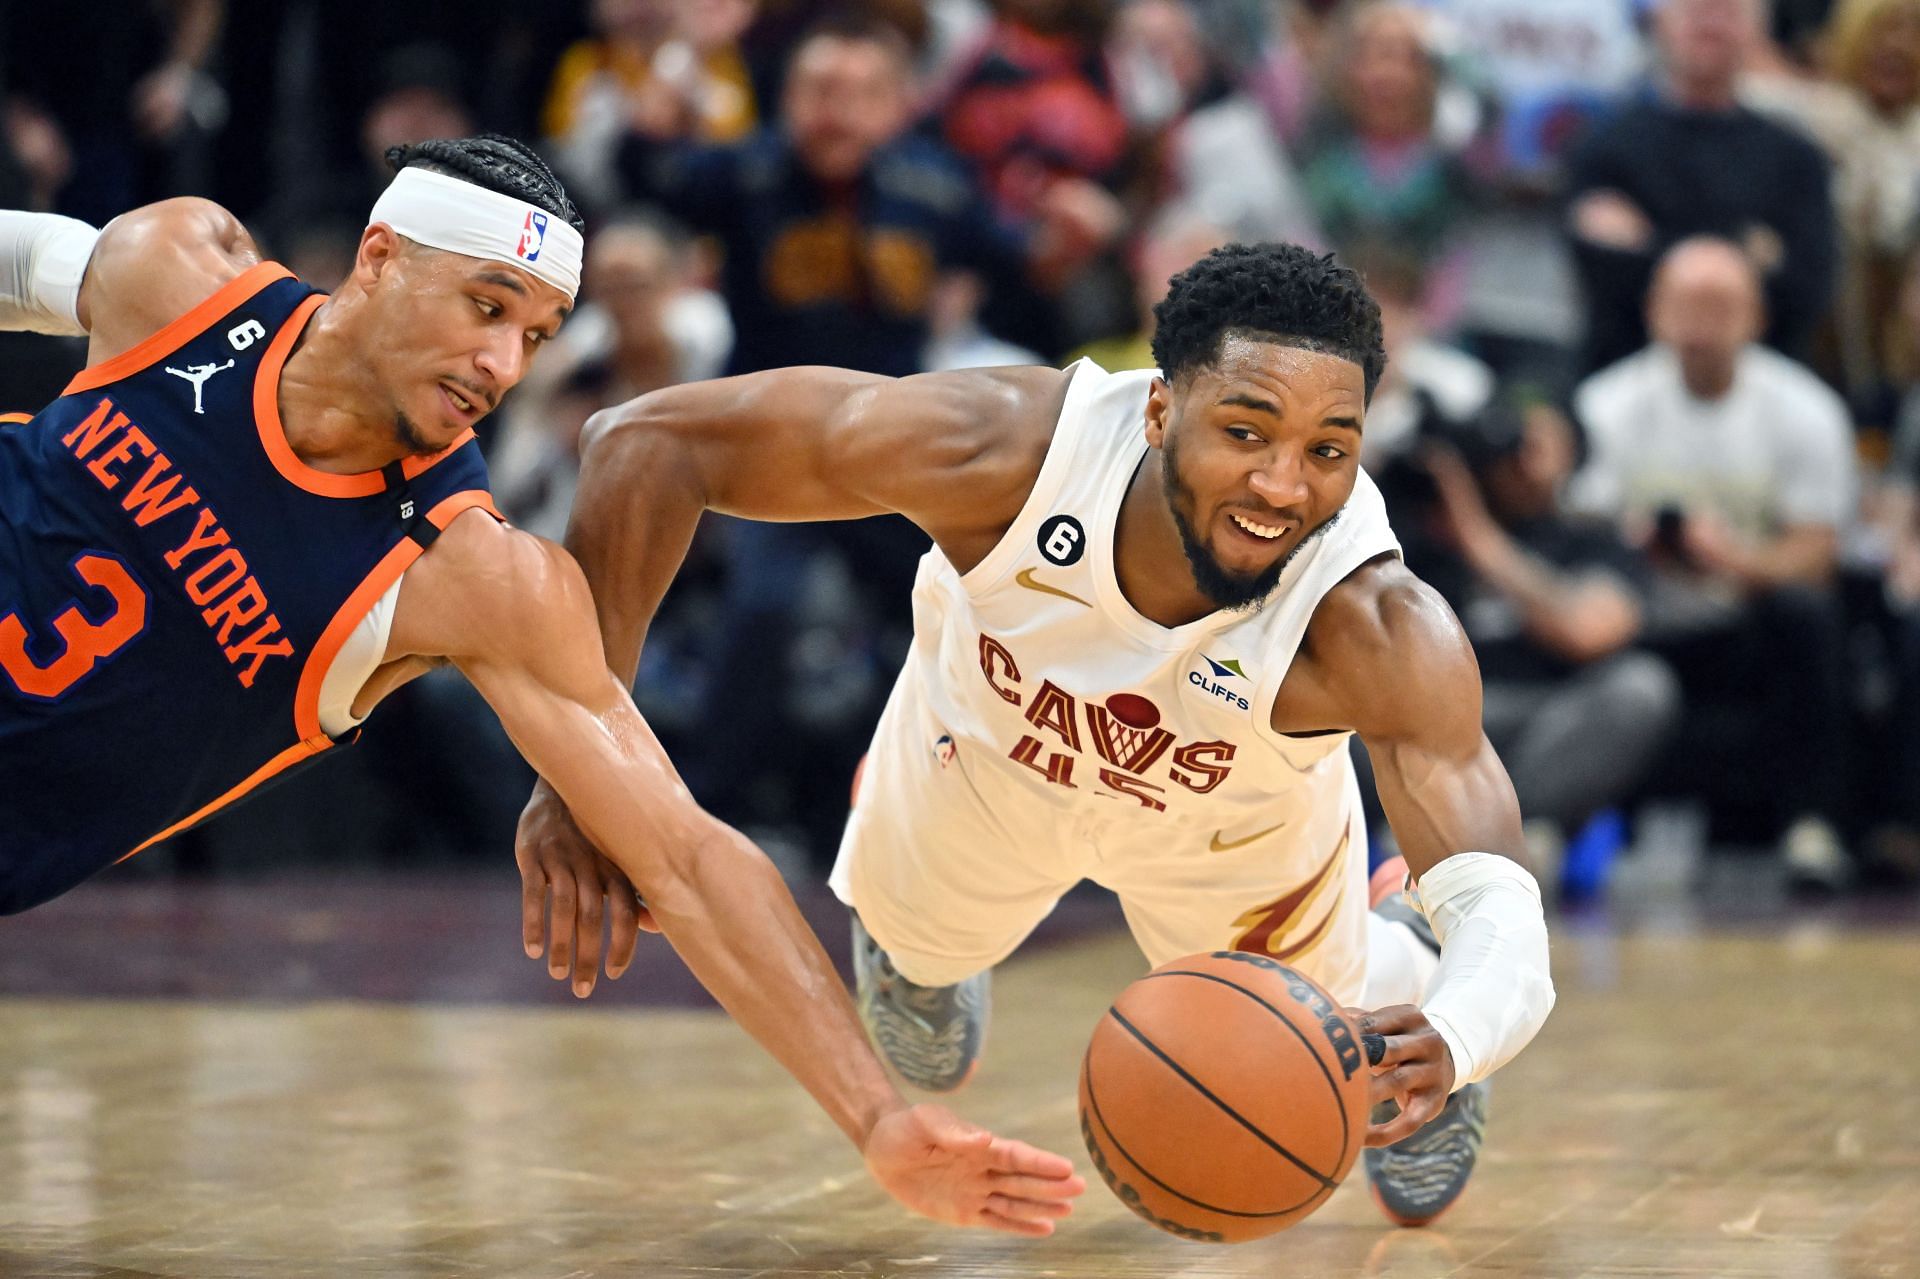 Josh Hart of the New York Knicks and Donovan Mitchell of the Cleveland Cavaliers